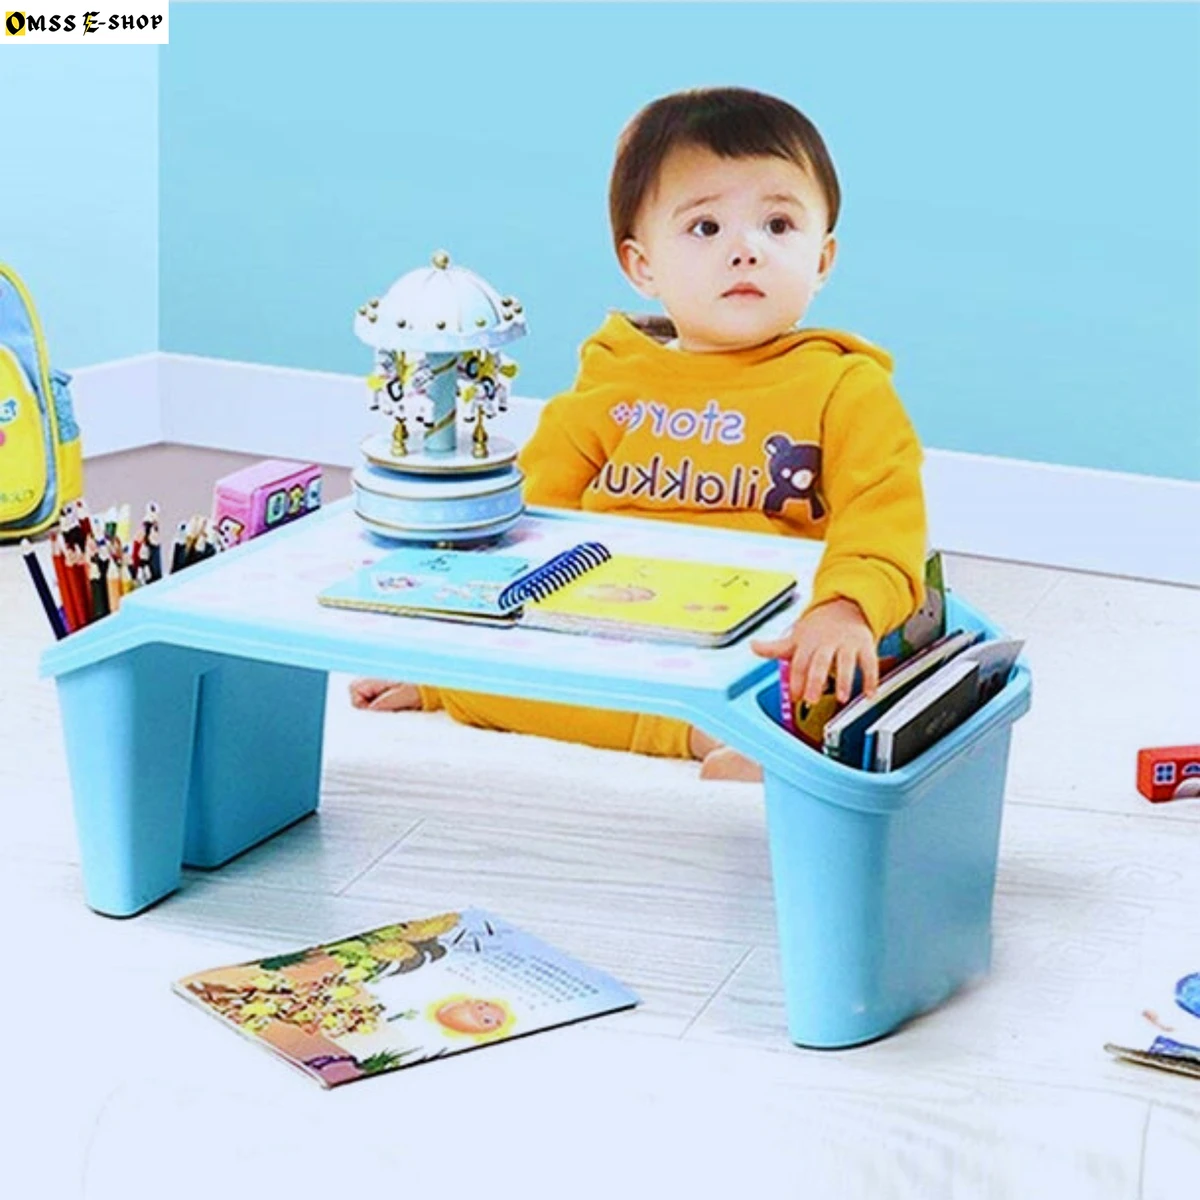 Plastic Mini Multi-functional Study Table for Kids Toddlers Baby Desk with Holder Organizer Portable Laptop Desk Durable Safe Material for Children